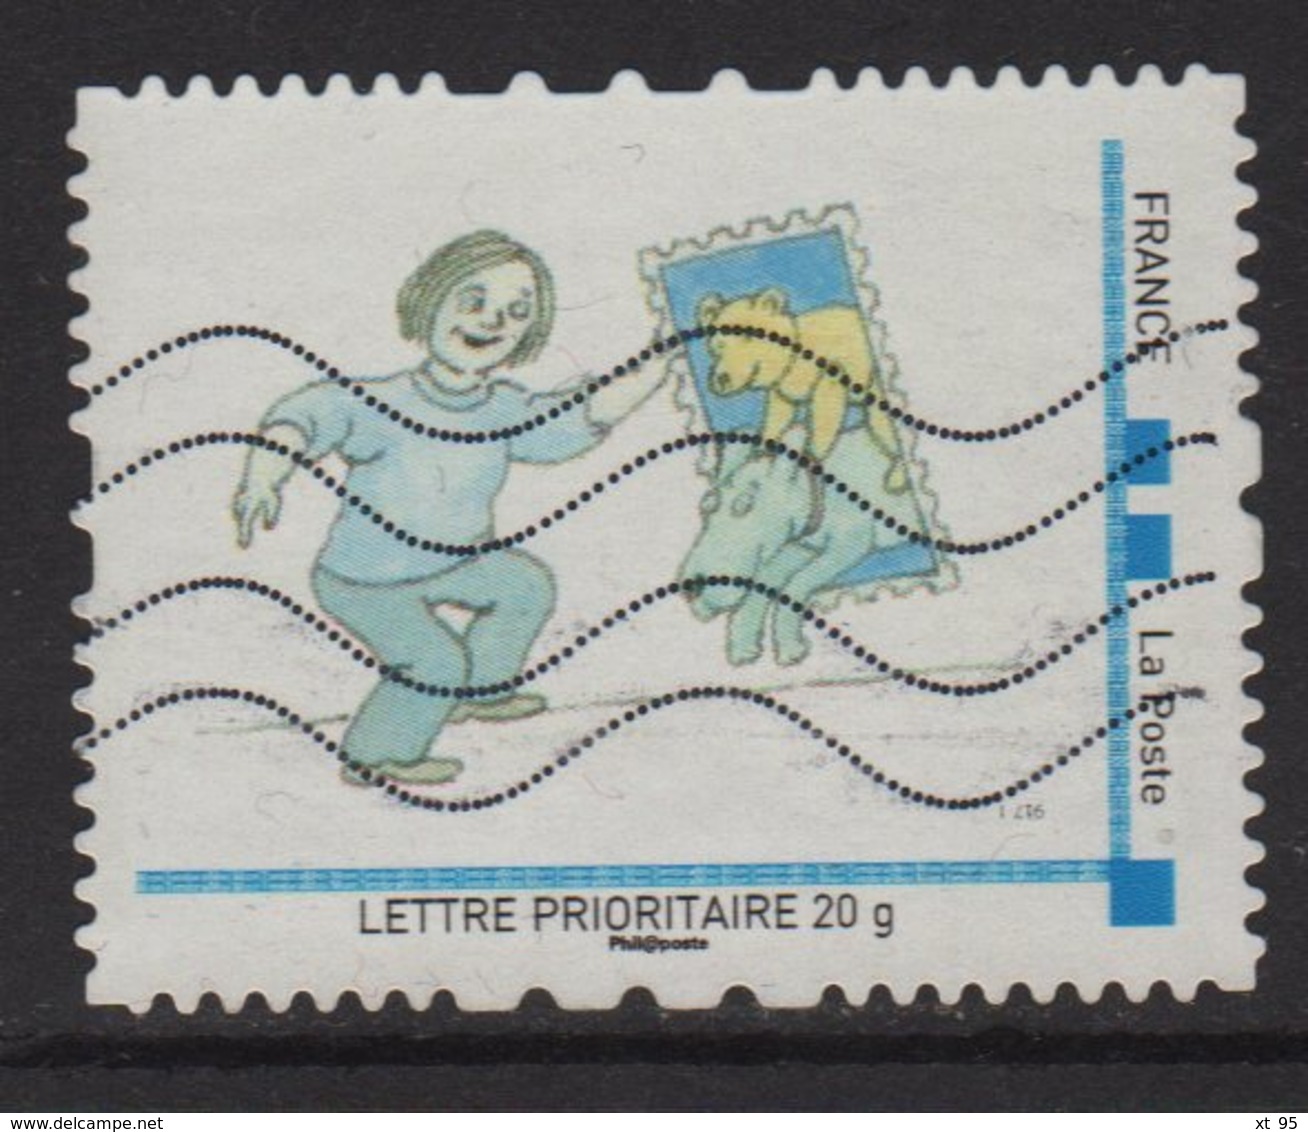 Timbre Personnalise Oblitere - Lettre Prioritaire 20g - Collectionnez Les Timbres - Gebraucht